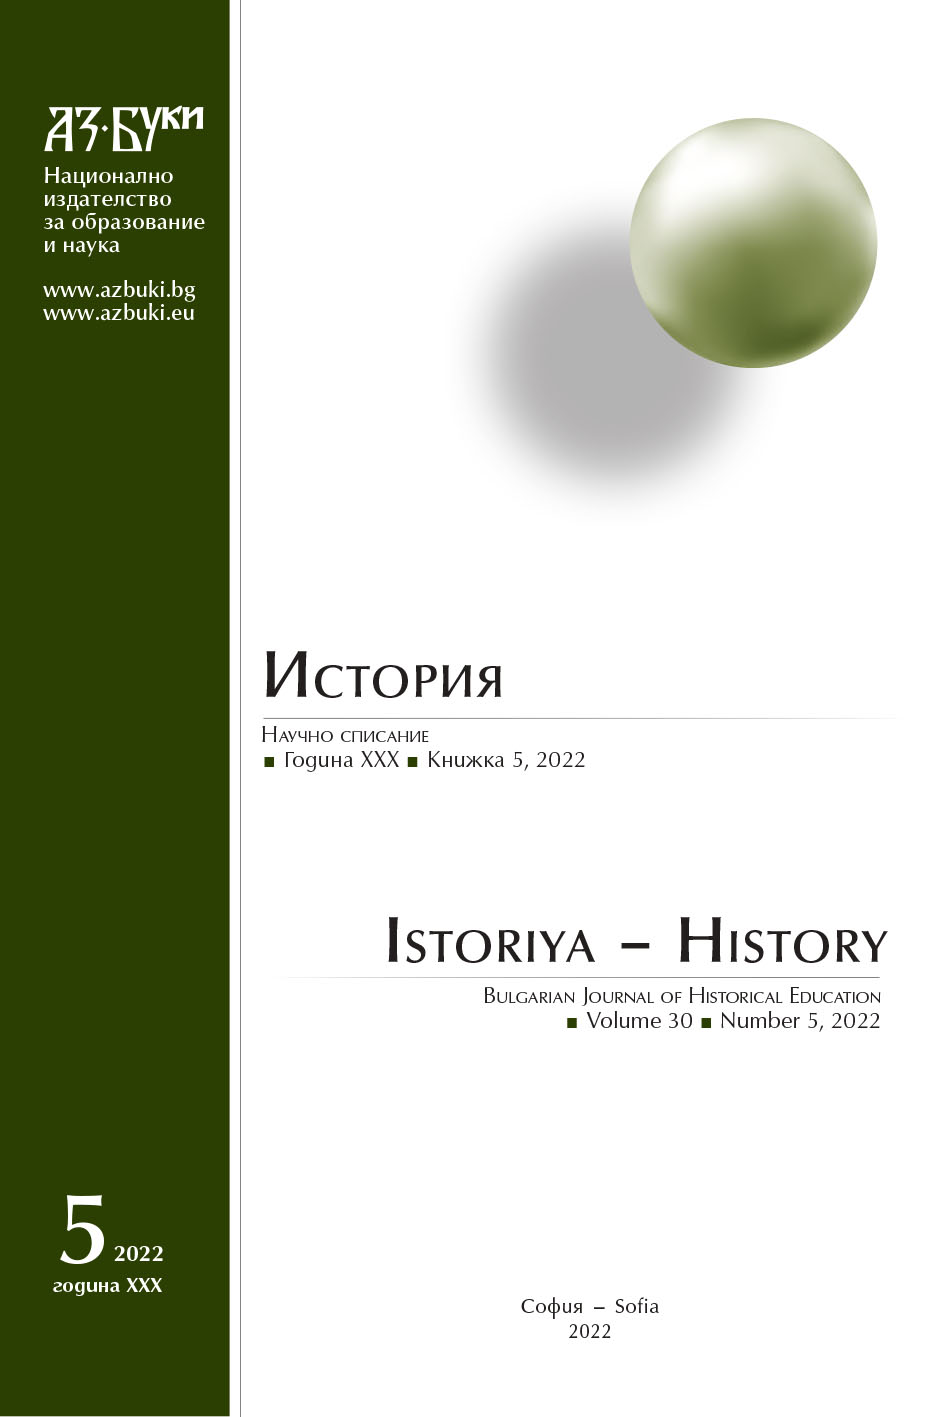 Symbolic Changes in the Space of the City: Address Urbanonyms of Khmelnytskyi in the XX Century Cover Image